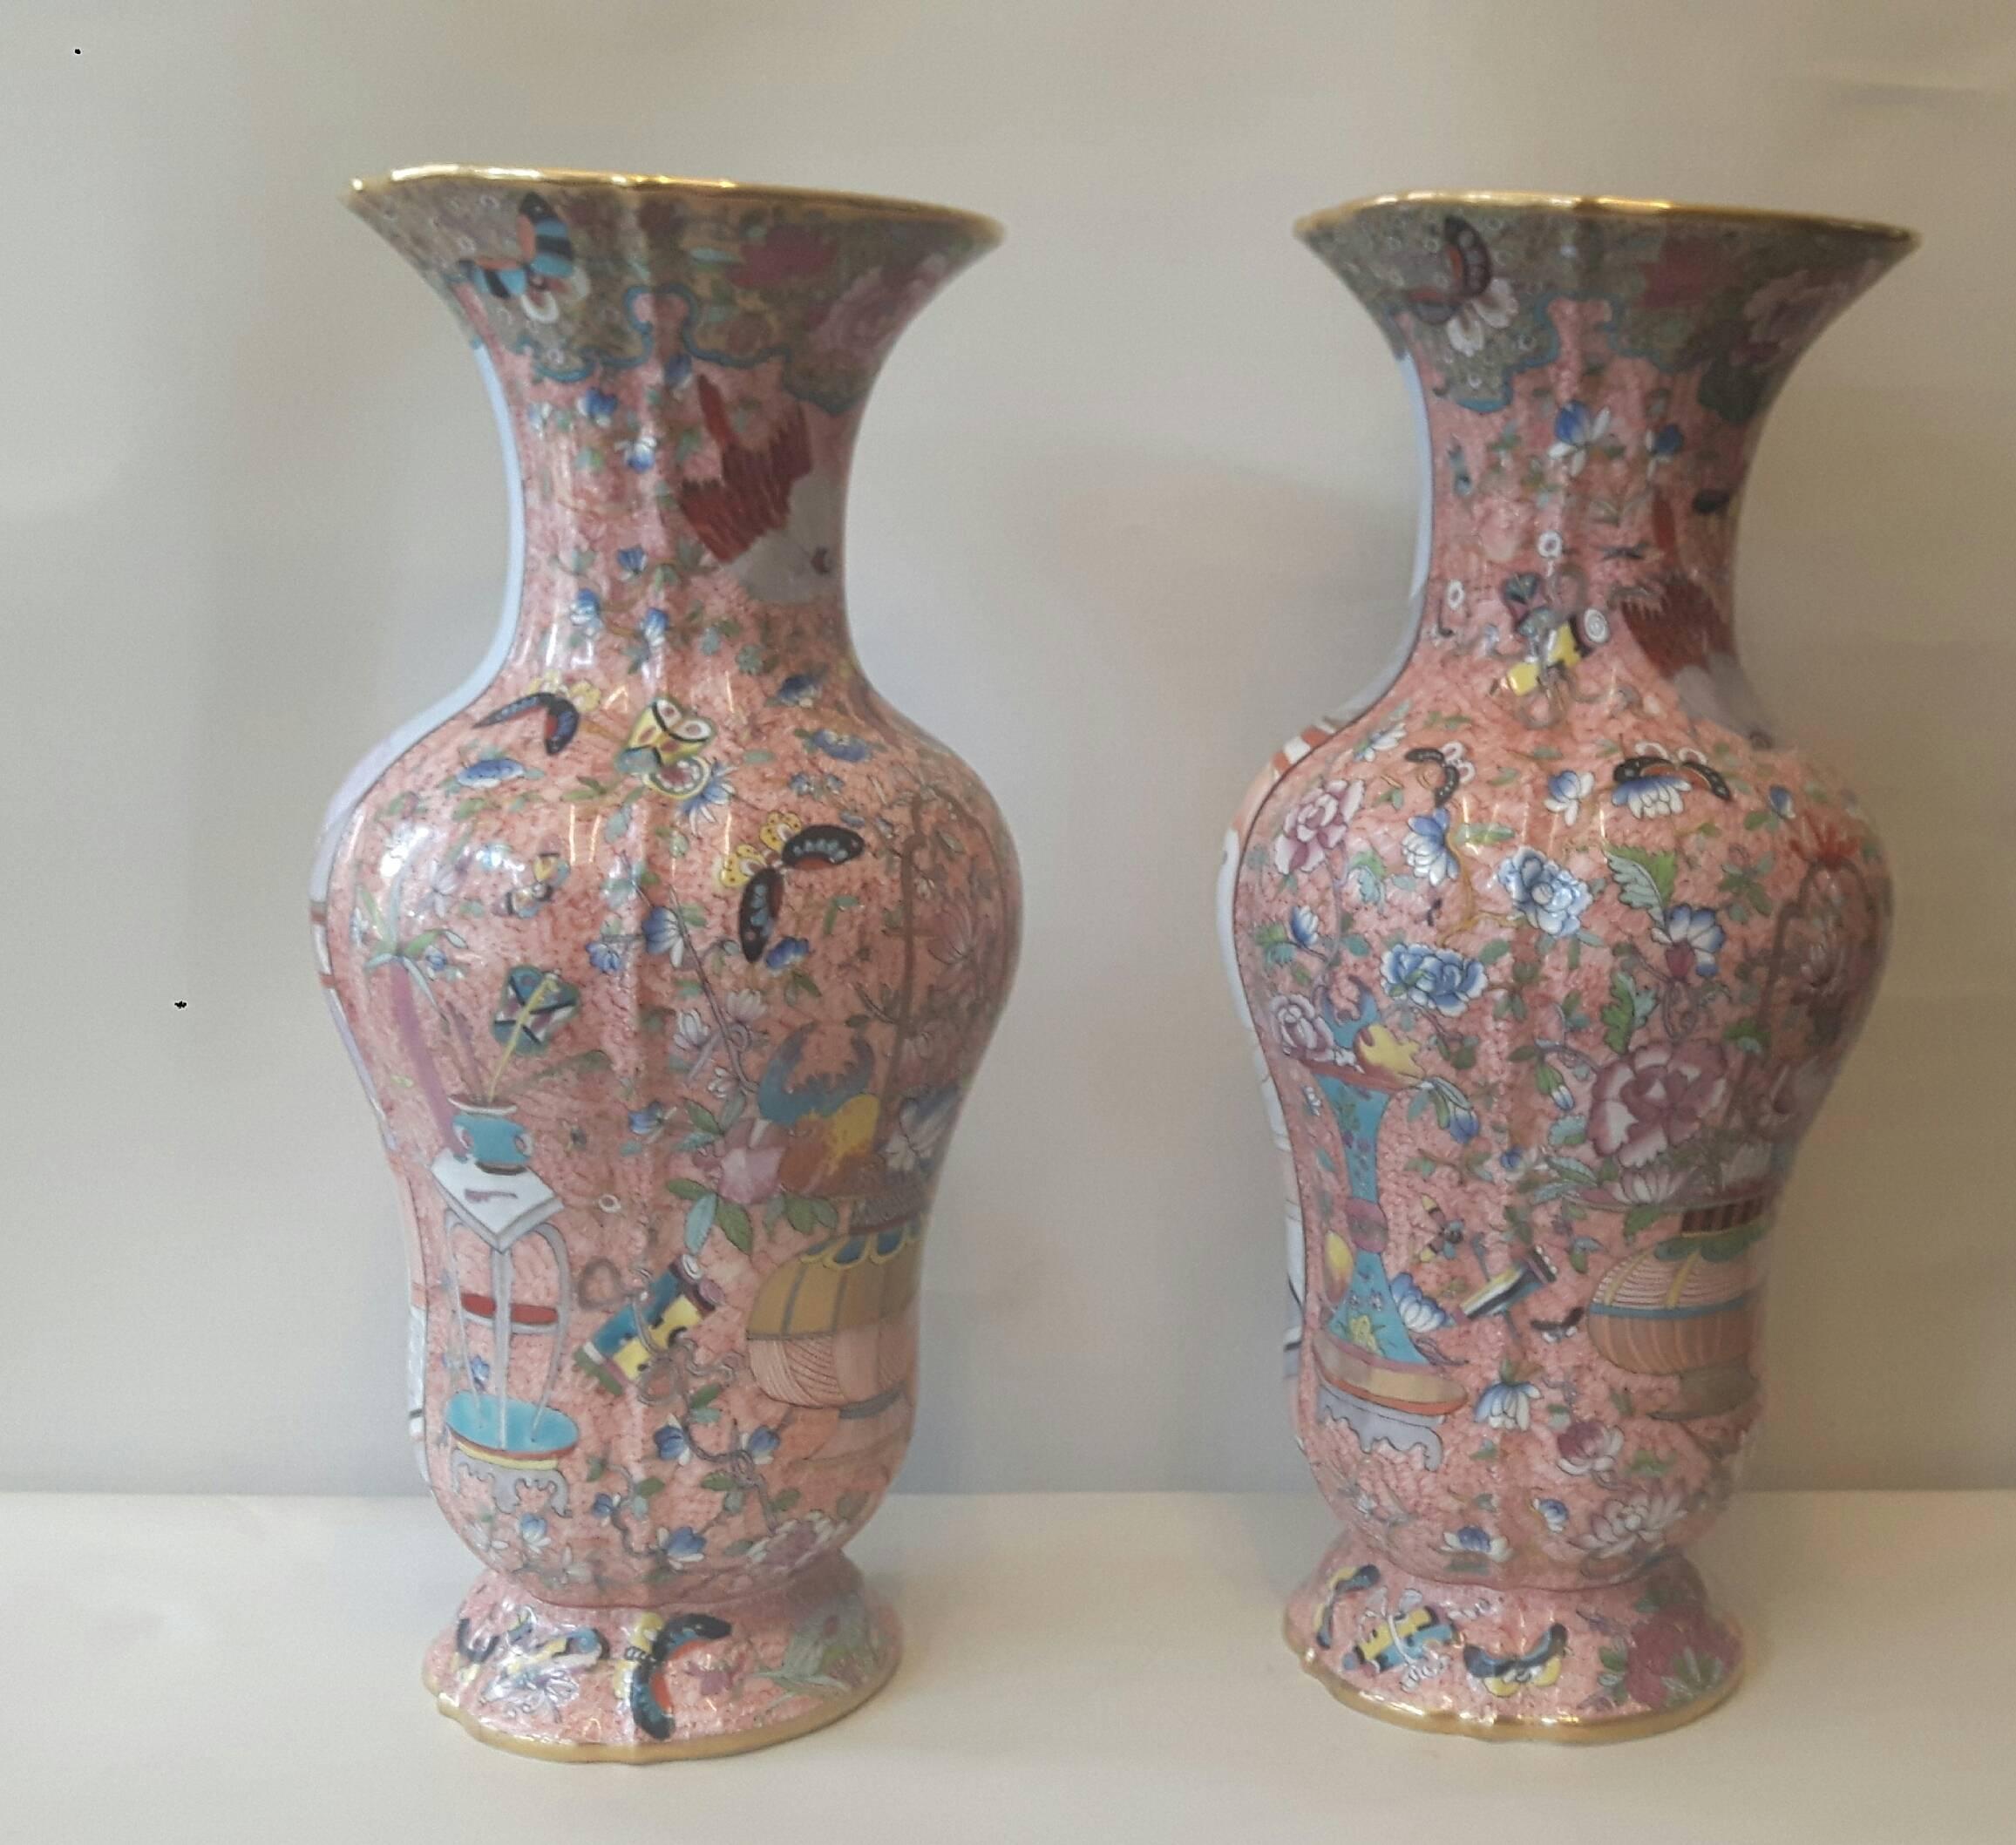 An impressive pair of chinoiserie Samson vases imitating the famille rose design, hand-painted with scenes of court life, overlooking a lake. The back of the vases are elaborately painted with flowers, butterflies and good luck charms on a rose